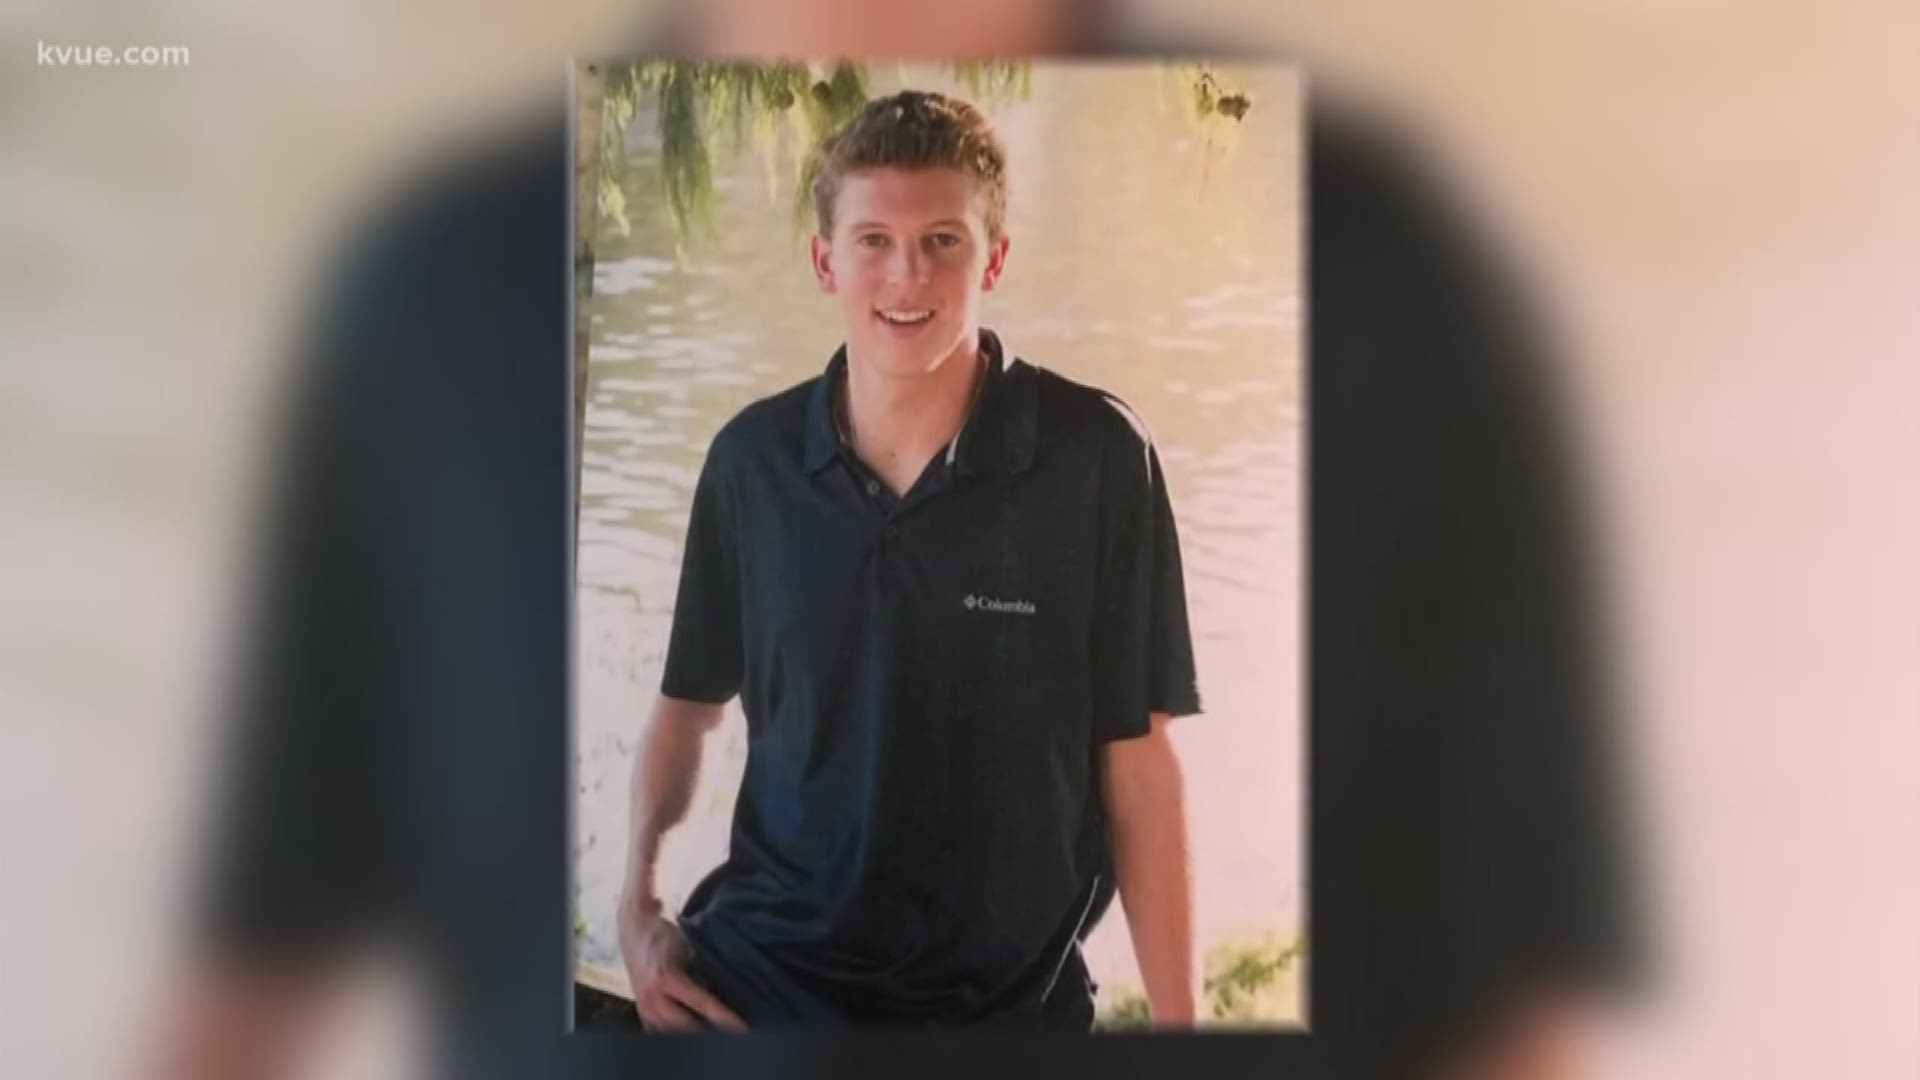 While the student body president says everyone is still mourning the death of Matthew Ellis, he hopes the move to suspend all fraternity and soroities at Texas State is temporary.